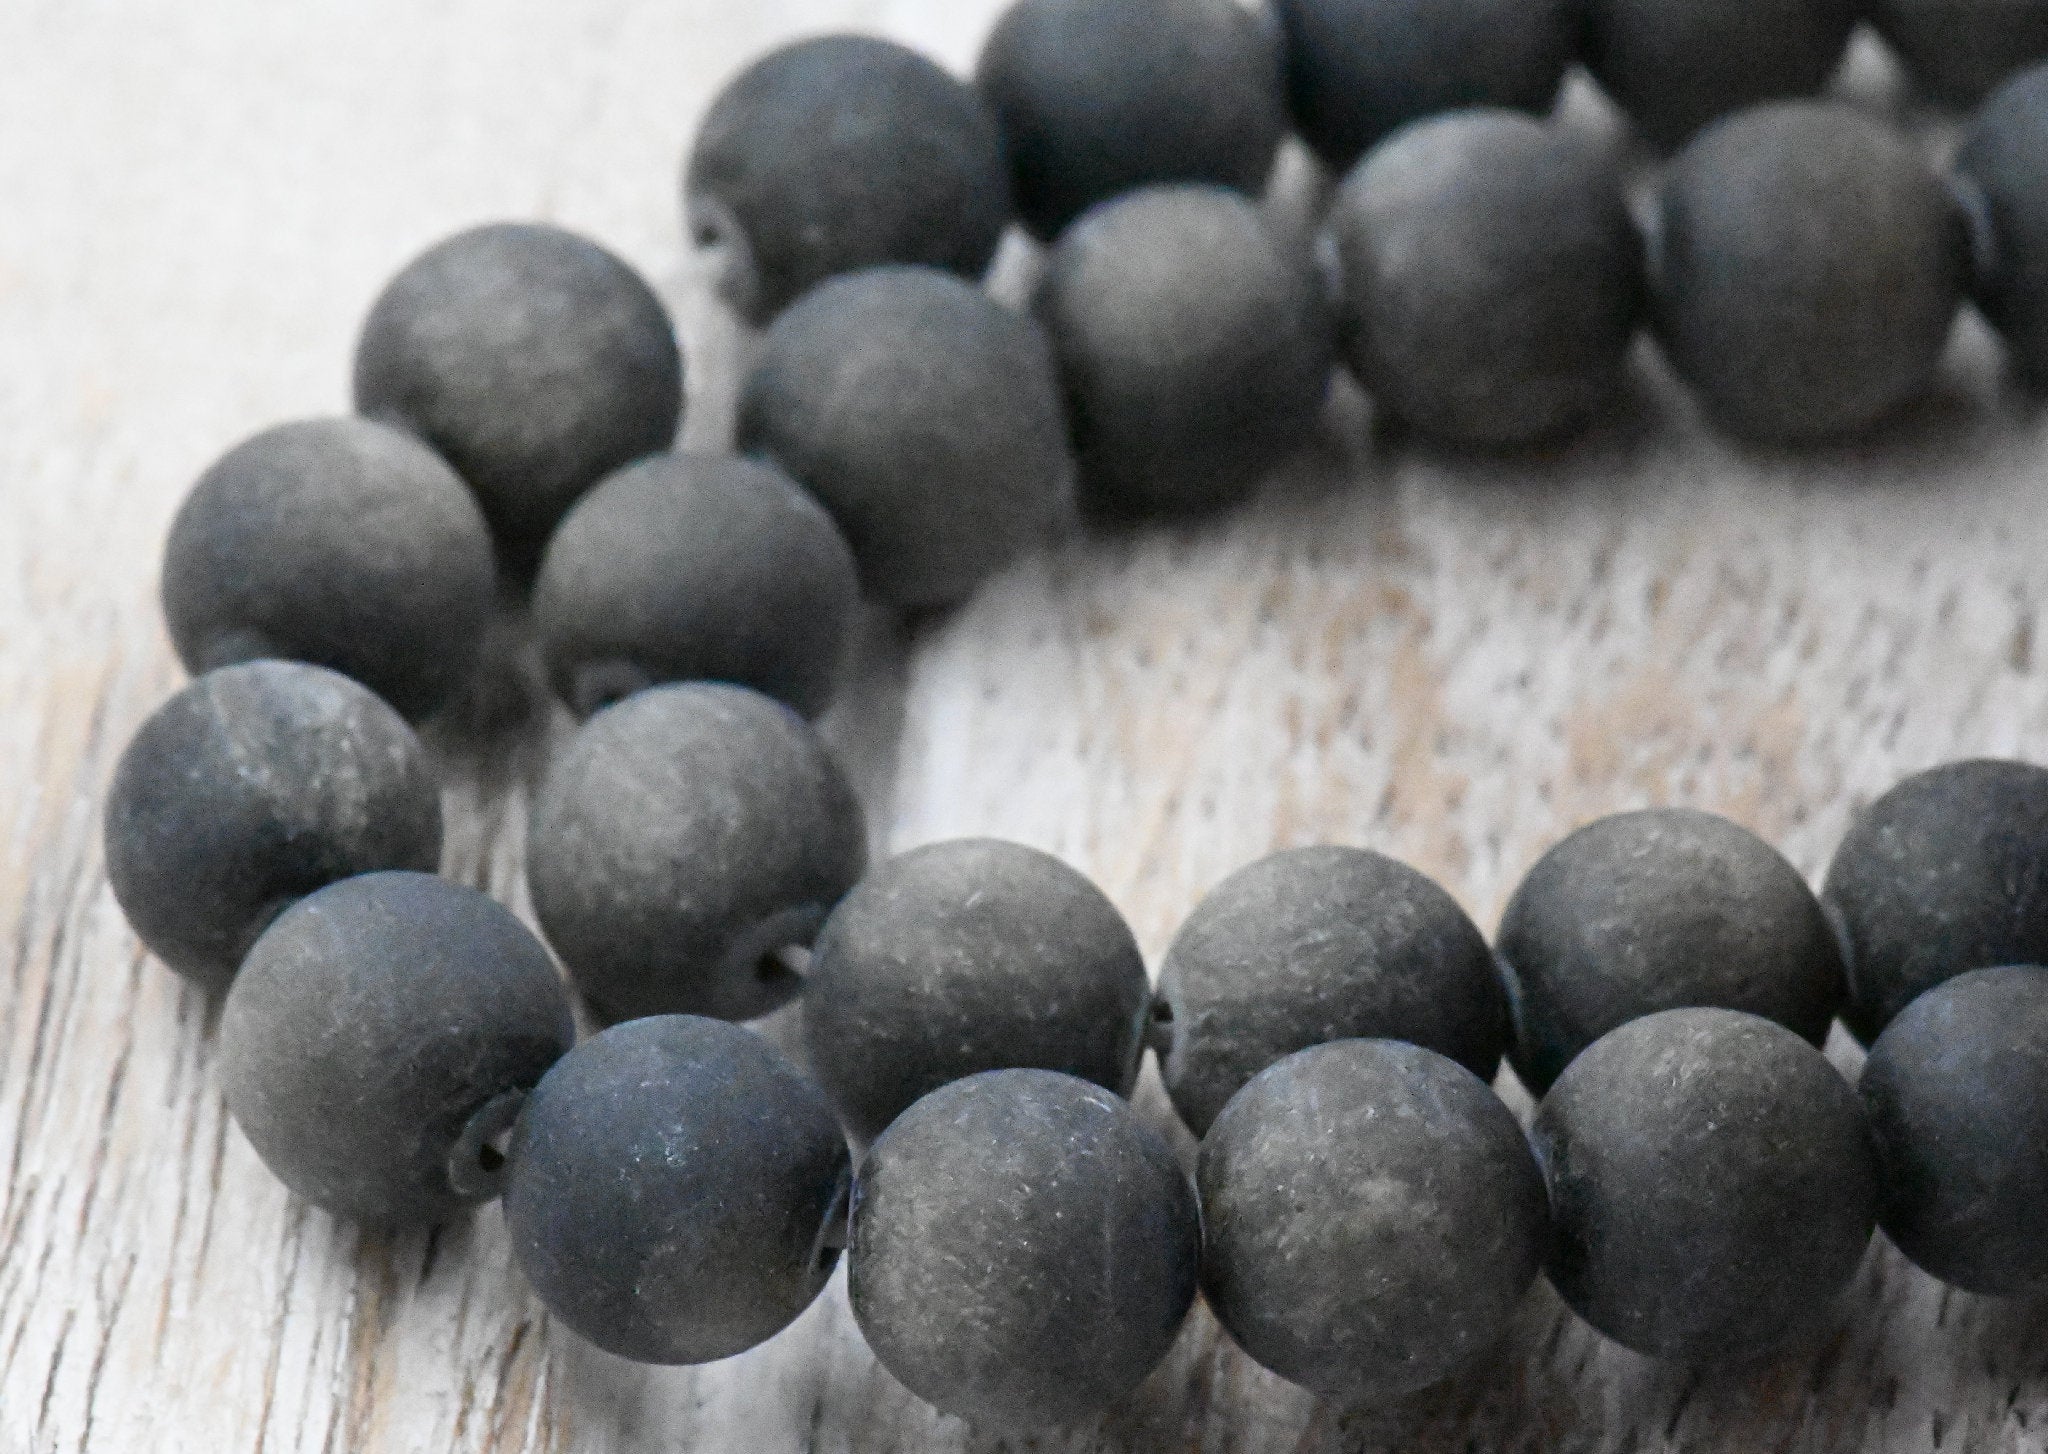 Frosted Natural Golden Sheen Obsidian Round Bead Strands, 8mm